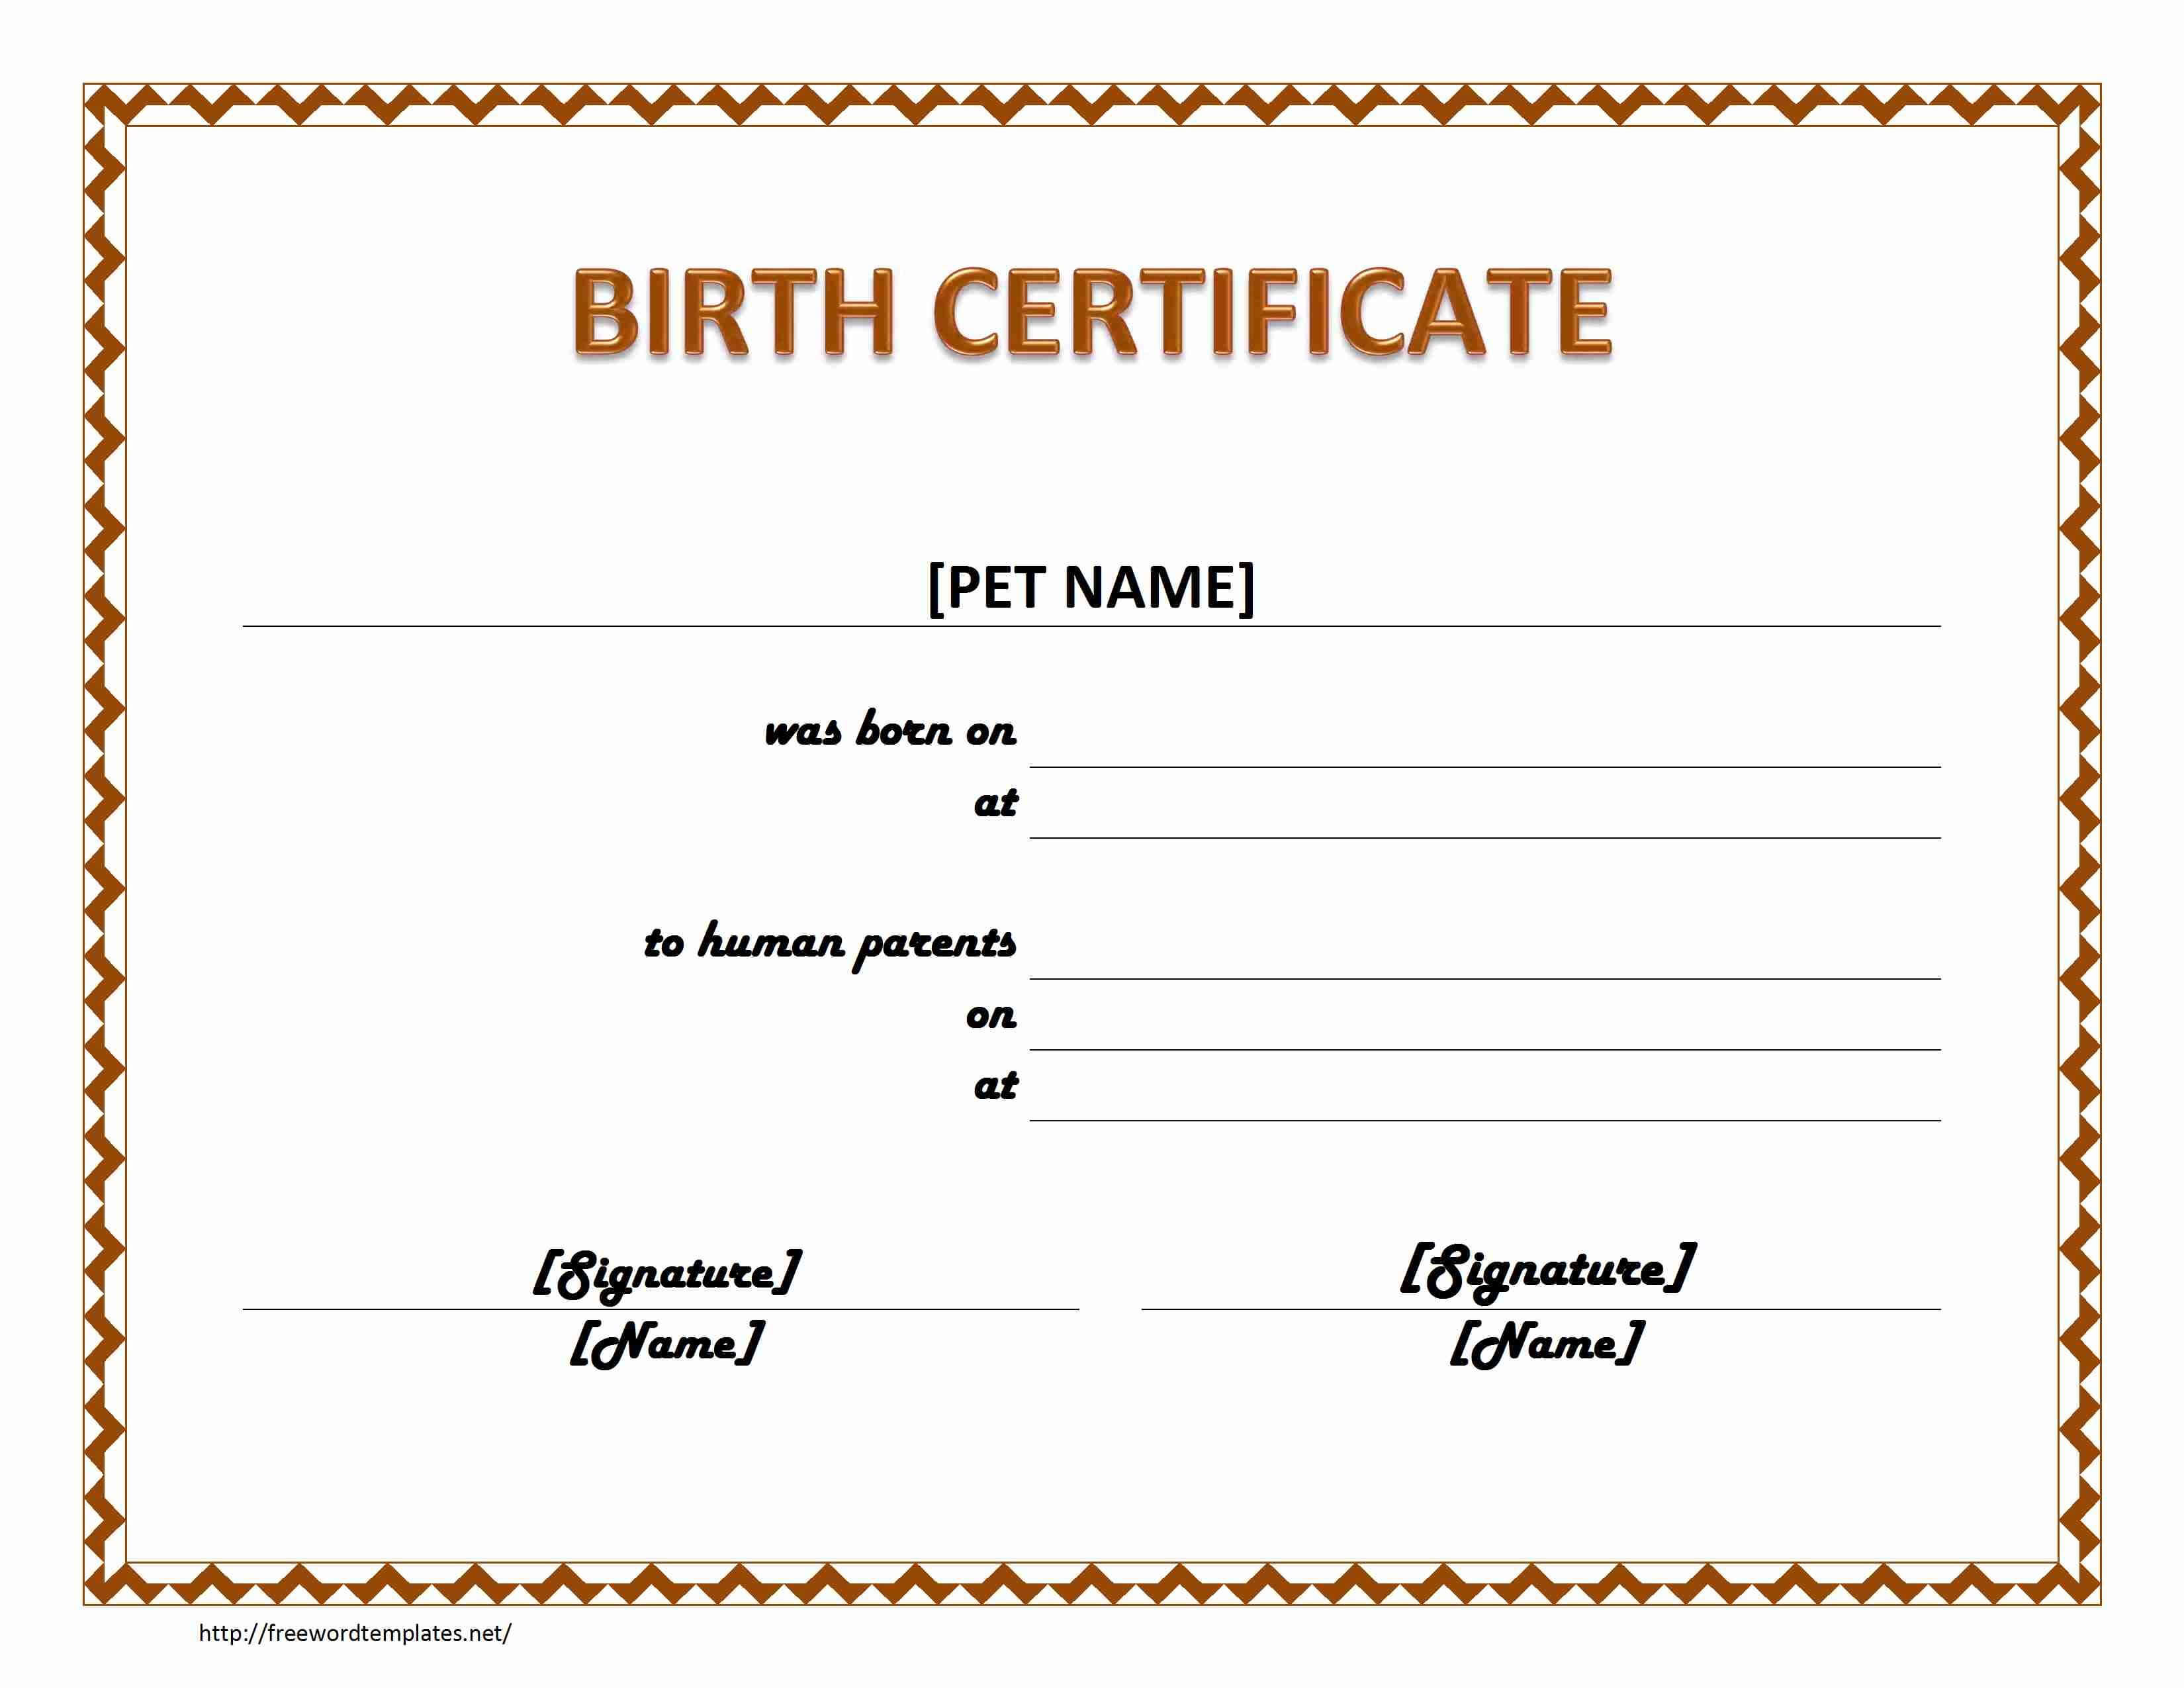 Pet Birth Certificate Maker | Pet Birth Certificate For Word With Official Birth Certificate Template